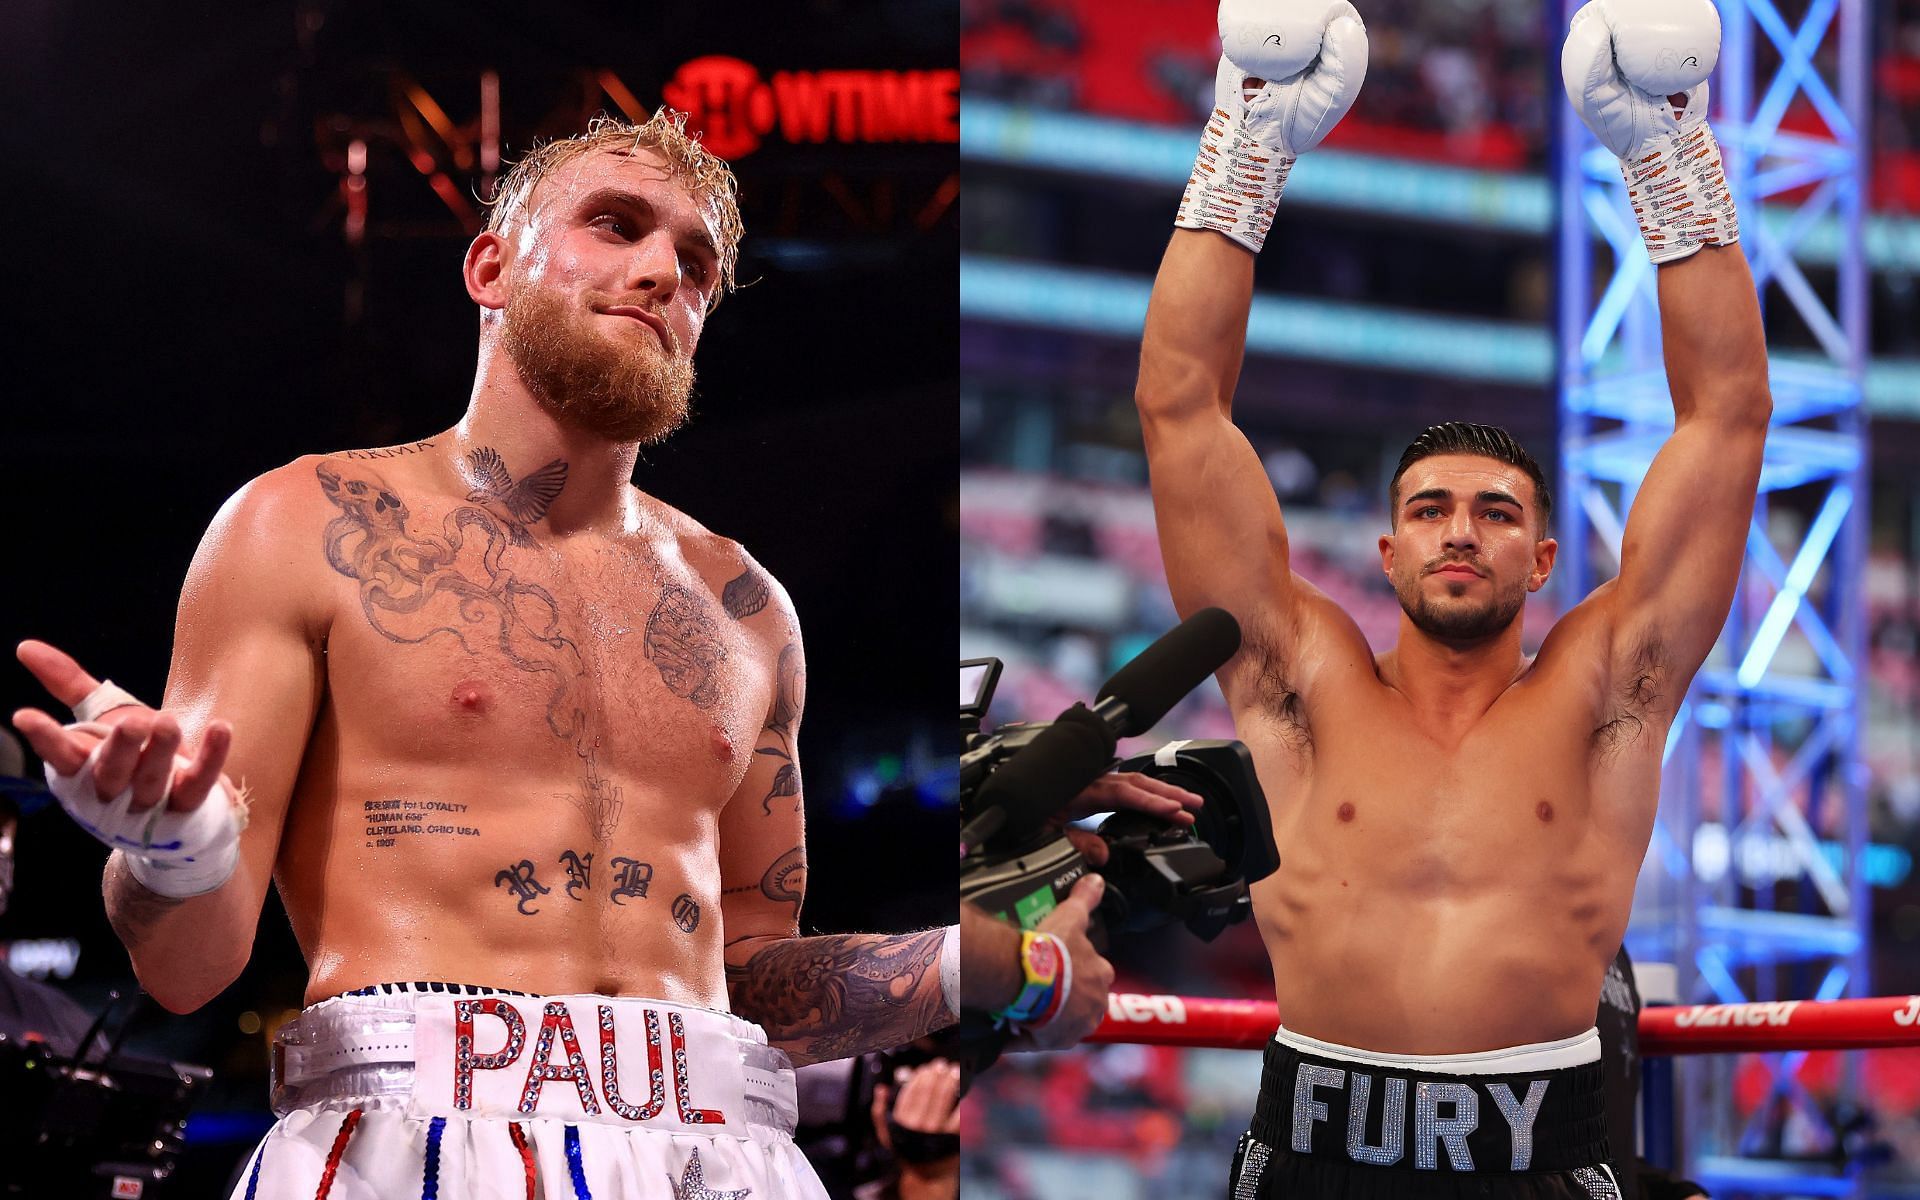 Jake Paul (left) and Tommy Fury (right) (Image credits Getty)